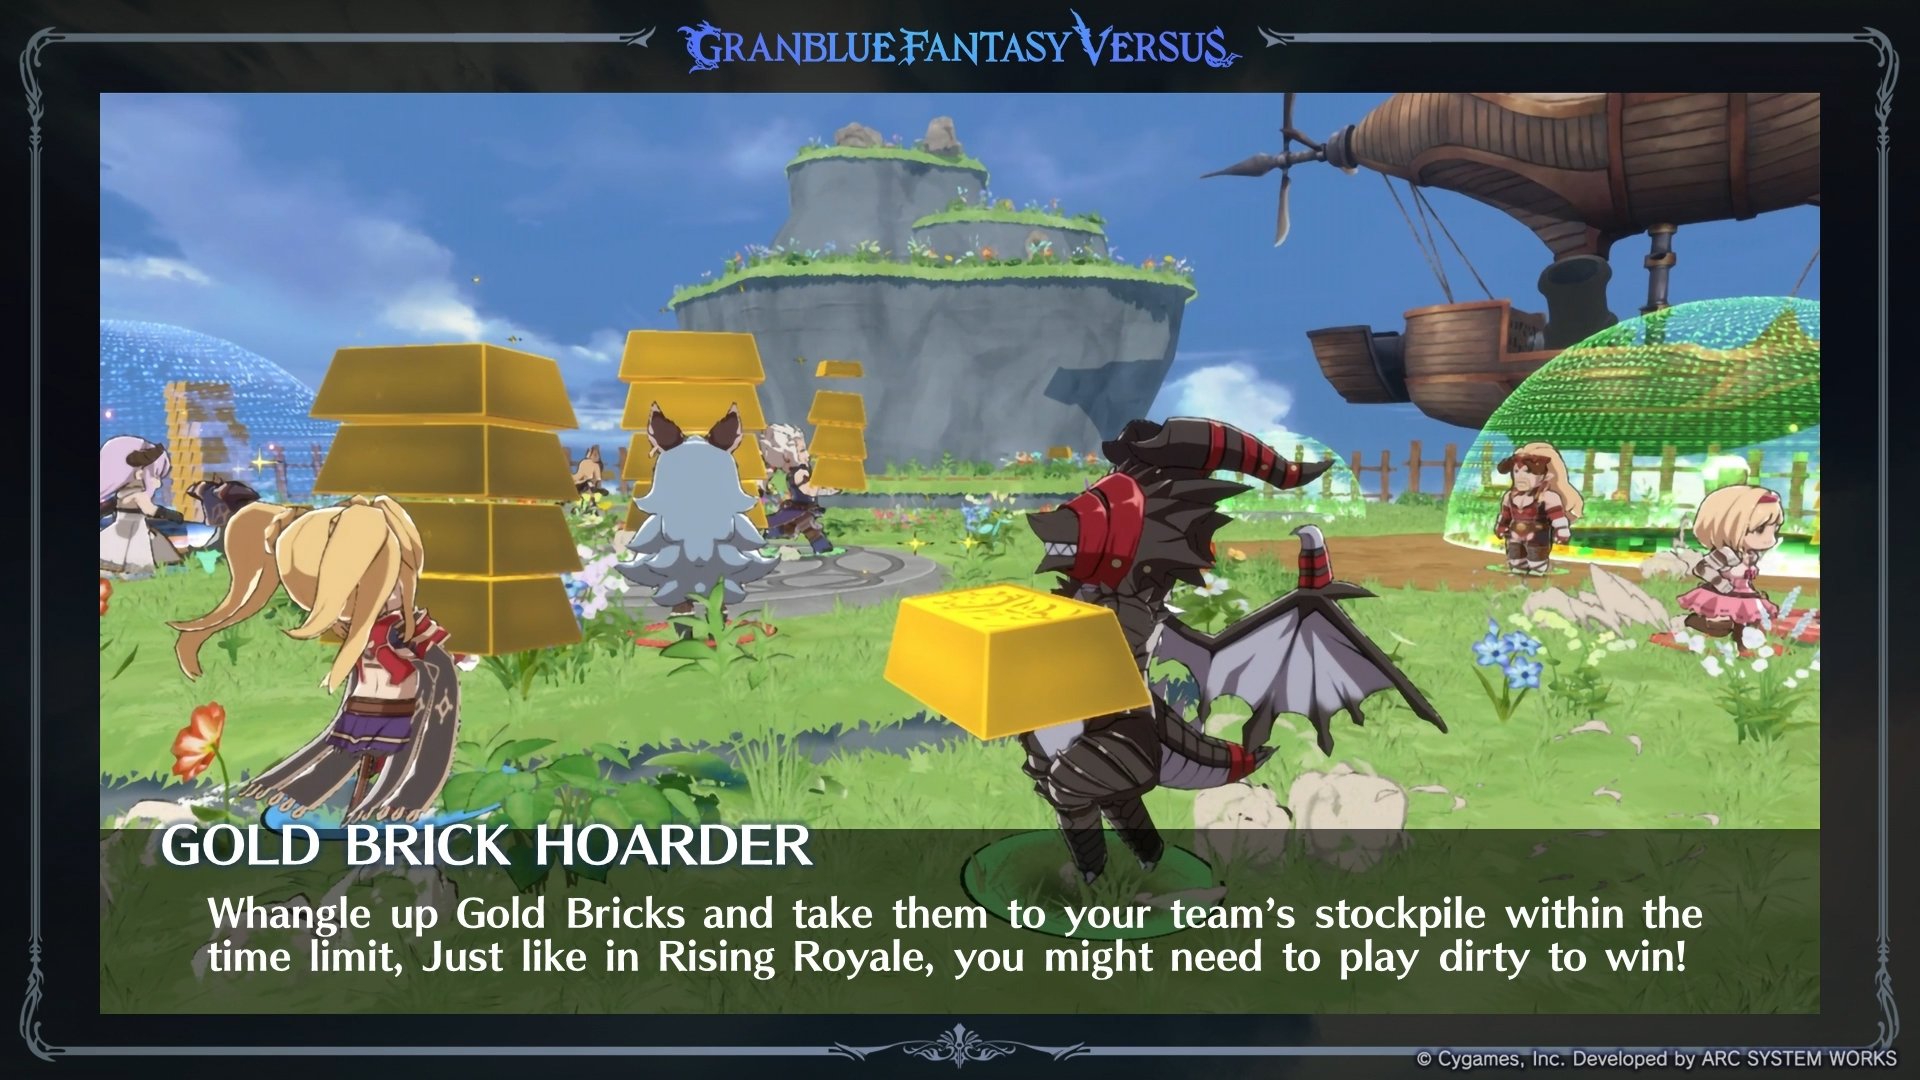 Granblue Fantasy Versus: Rising Review - A Shiny New Coat On A Familiar  Fighter